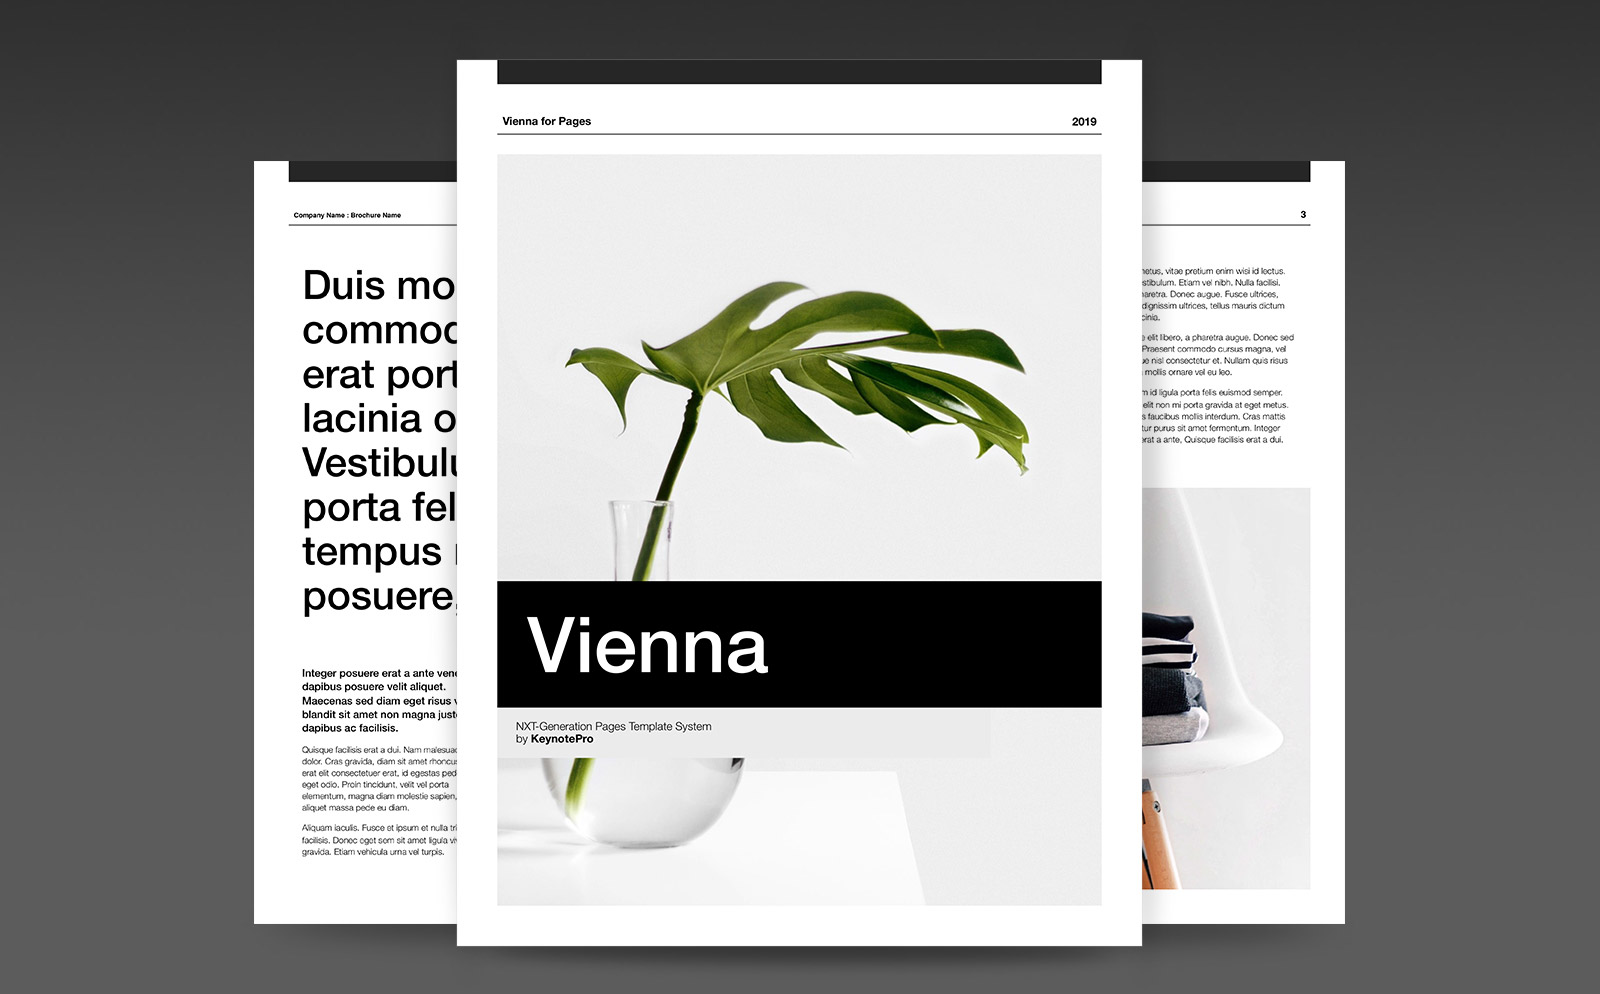 Vienna (NXT) Template System for Pages